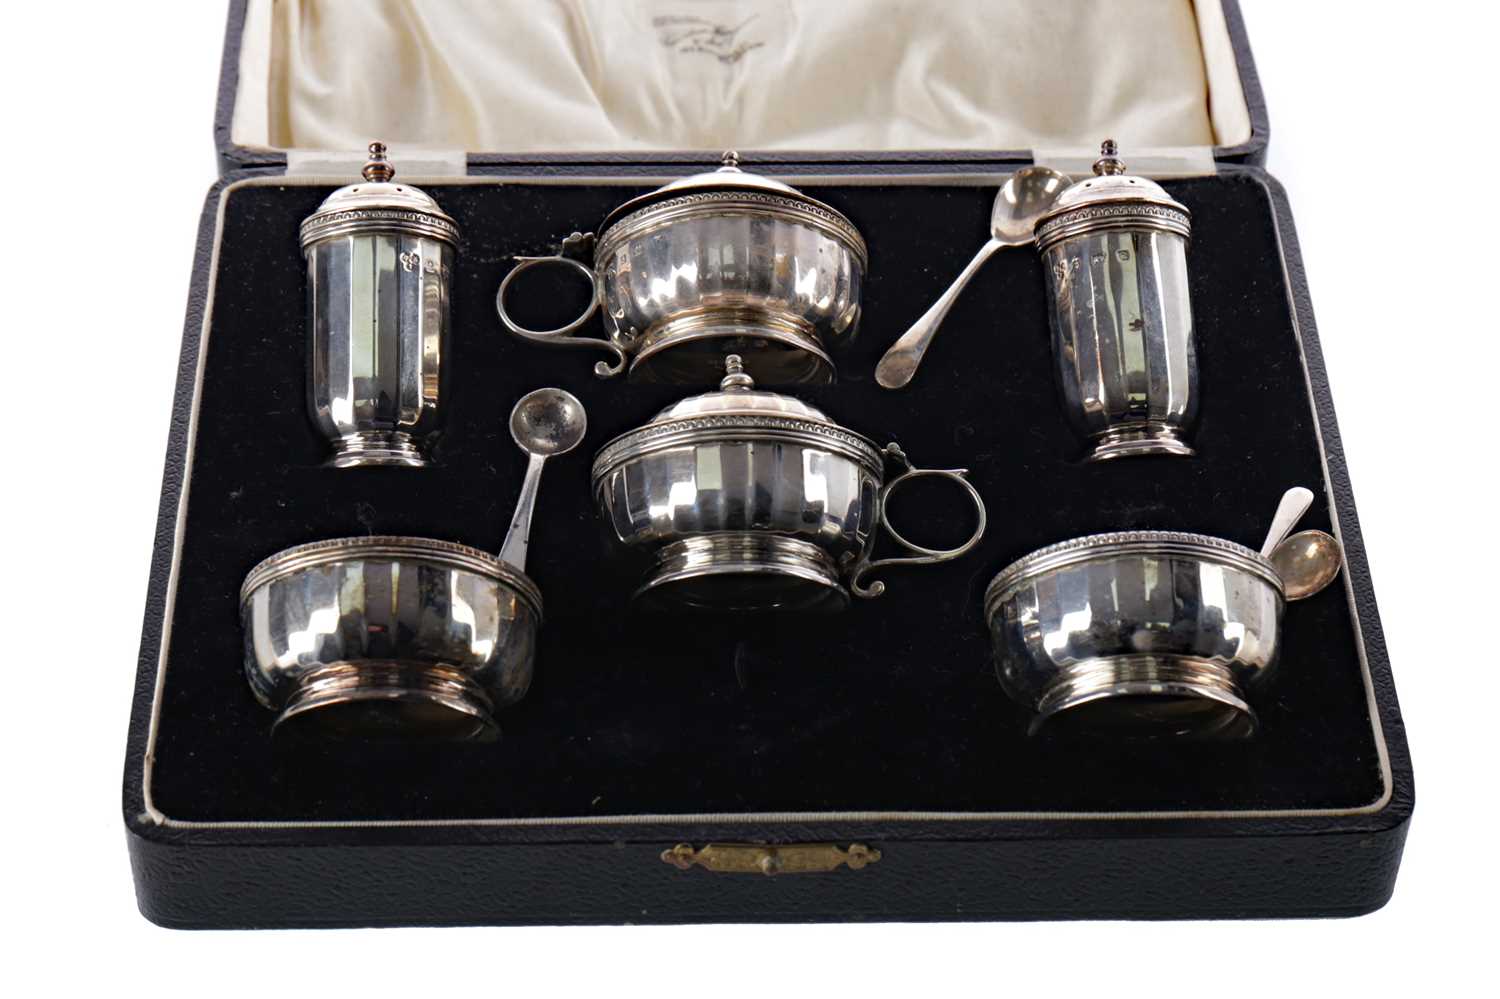 Lot 523 - A CASED PAIR OF EARLY 20TH CENTURY SILVER BONBON DISHES ALONG WITH A CASED CRUET